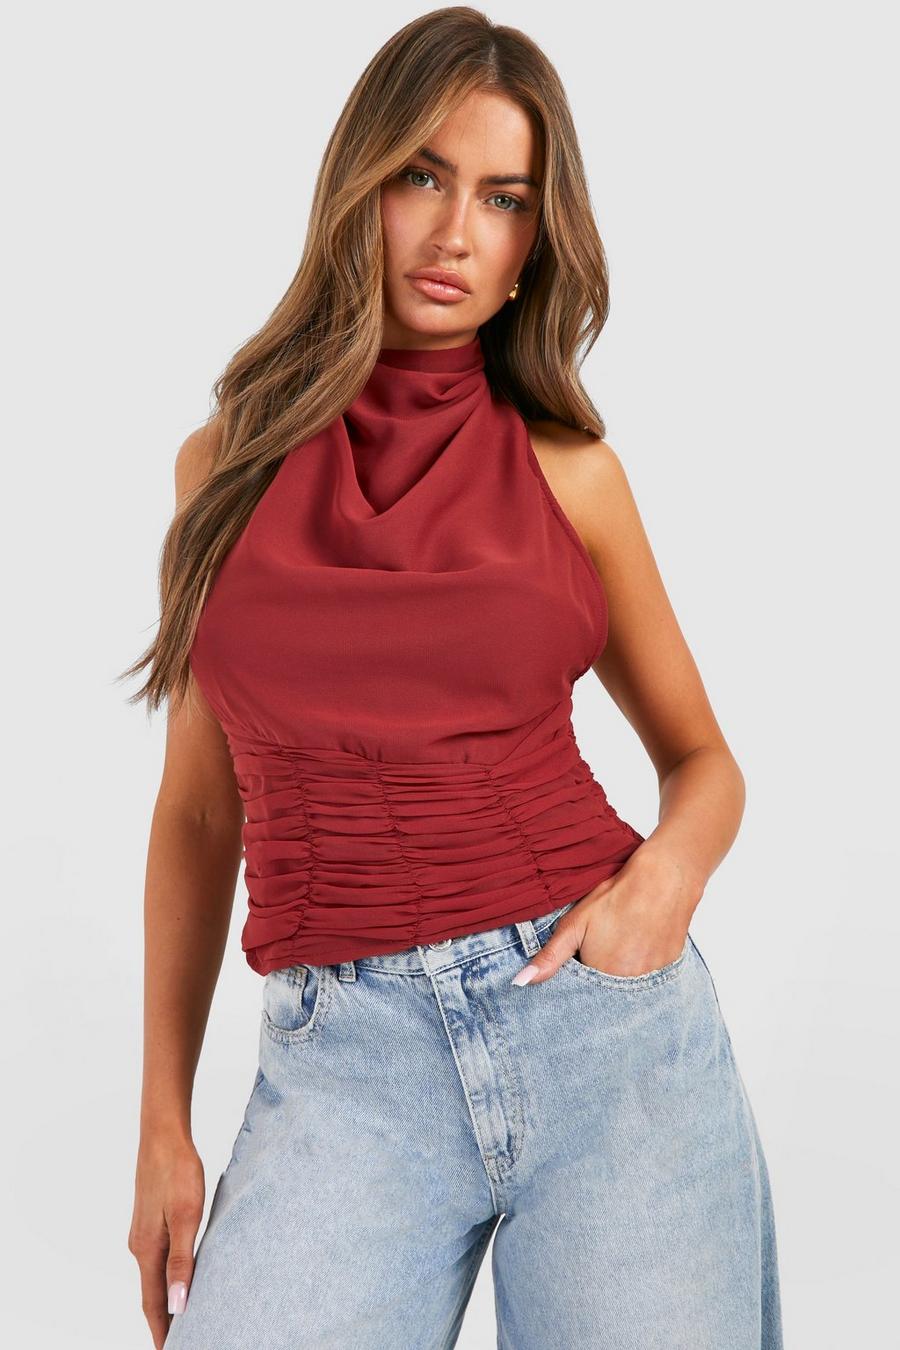 Red Halter Chiffon Ruched Top